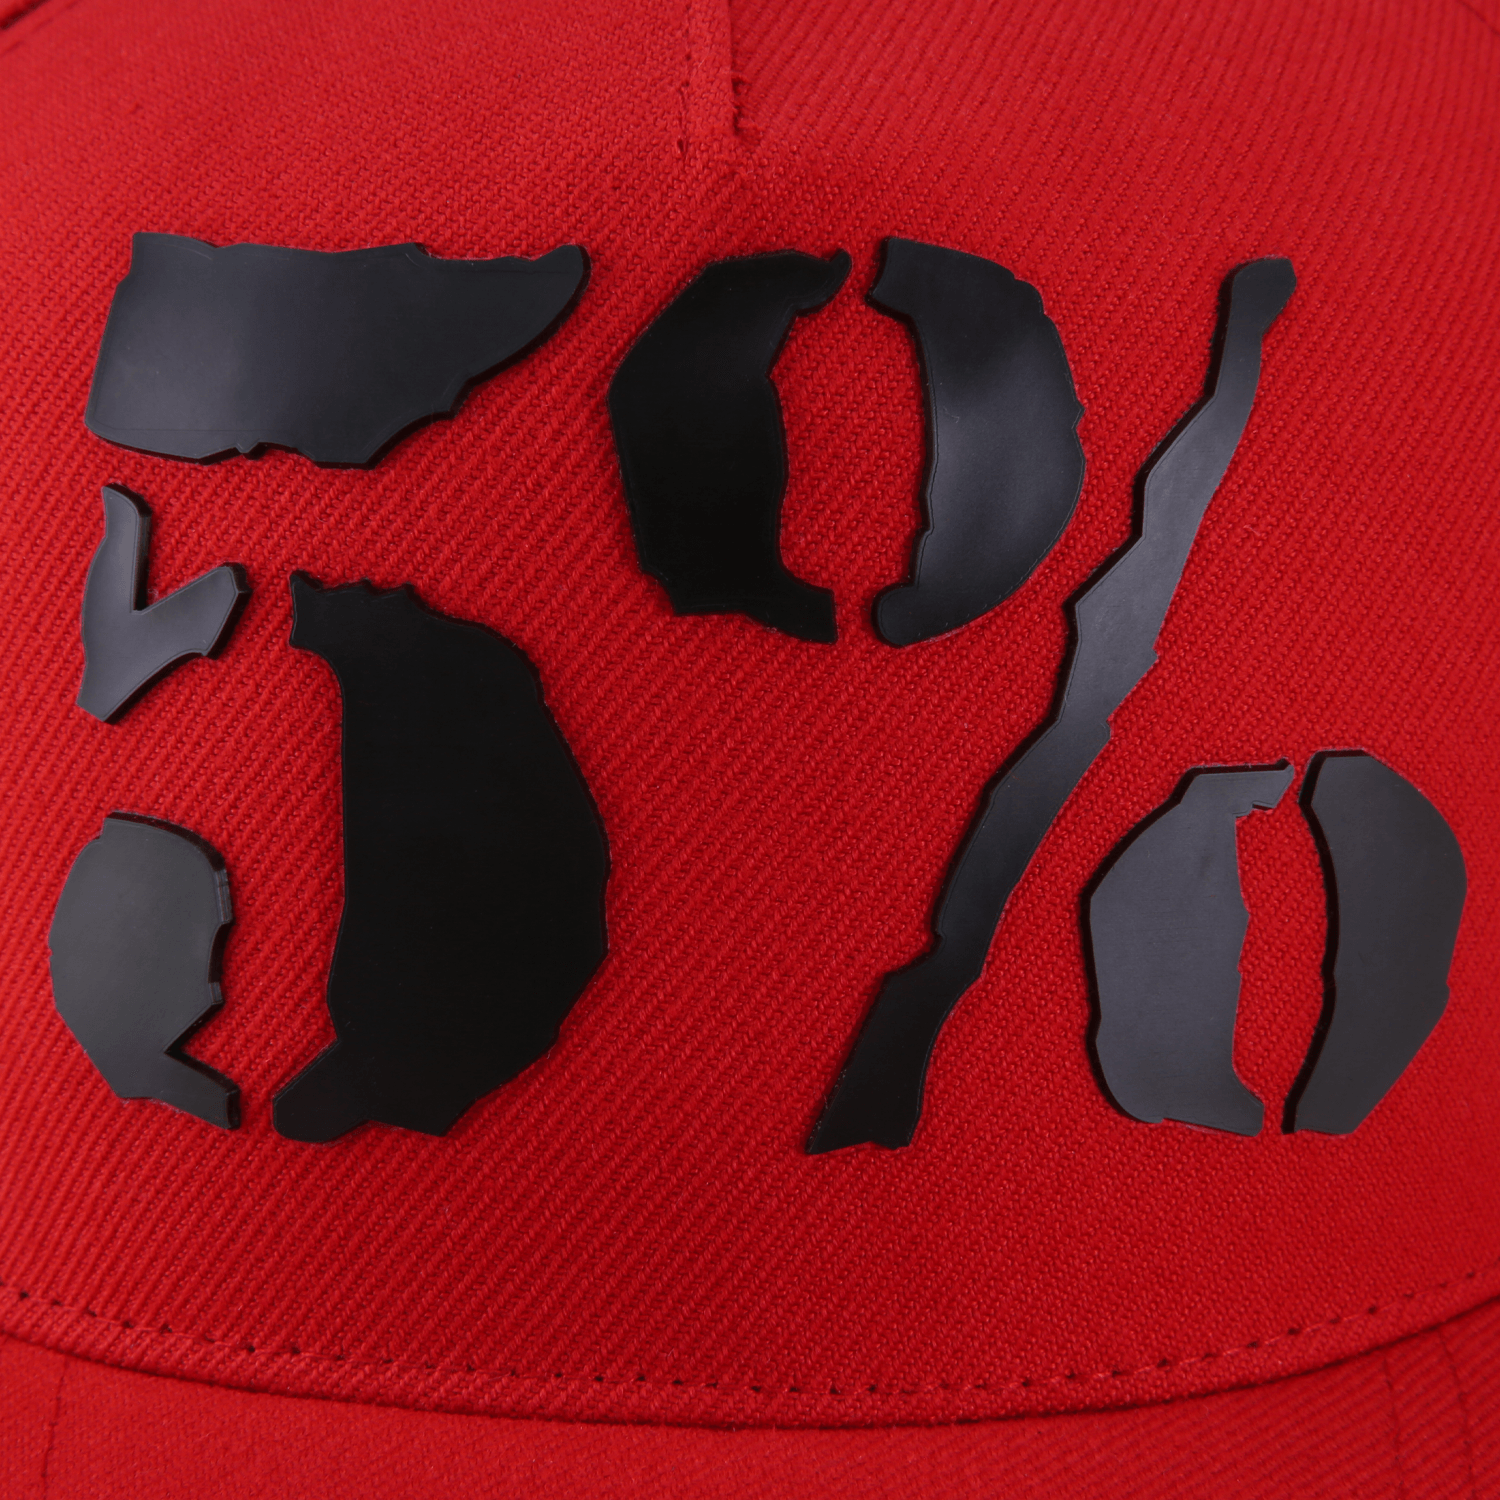 5% Rubber Logo, Red Hat with Black Lettering - 5% Nutrition